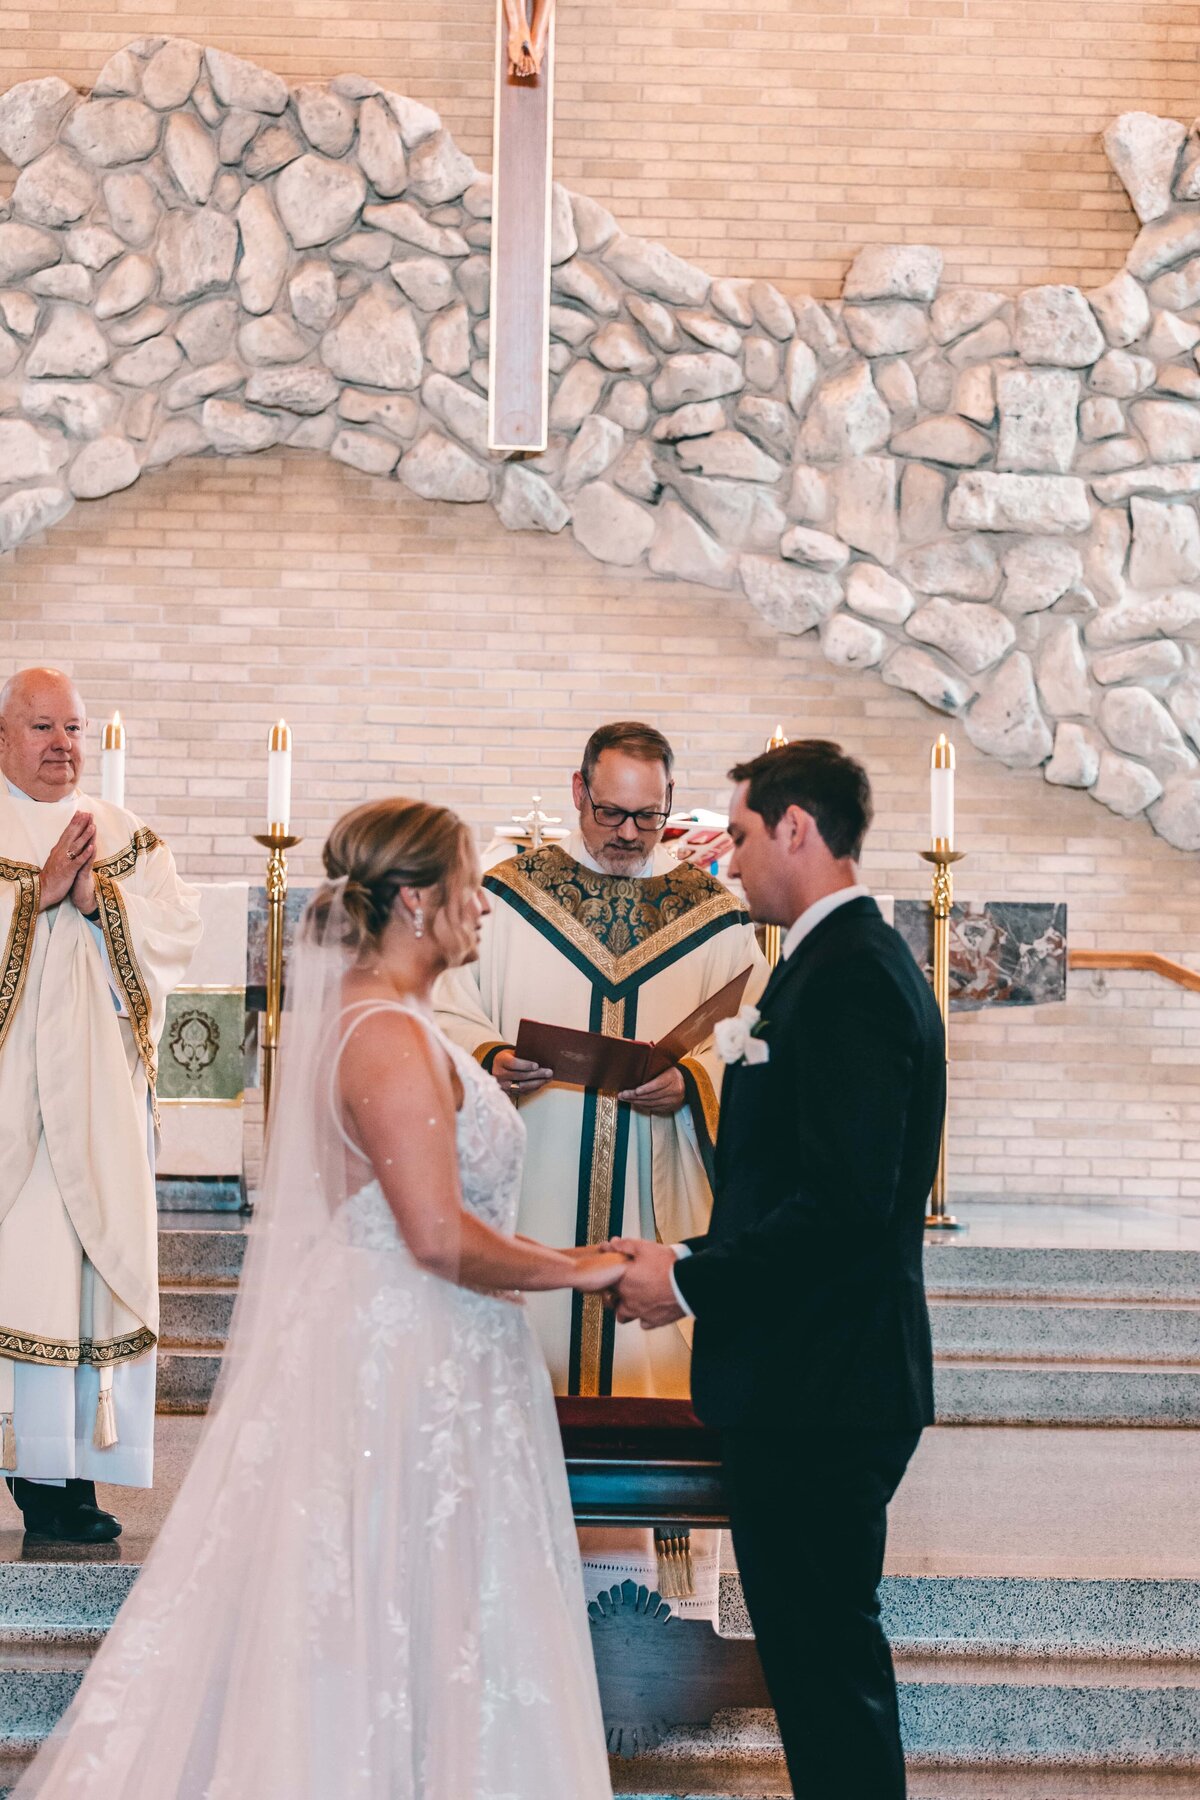 A bride and groom exchange vows in front of a priest at a church altar, with lit candles and a stone backdrop, under the guidance of a wedding coordinator from Iowa.